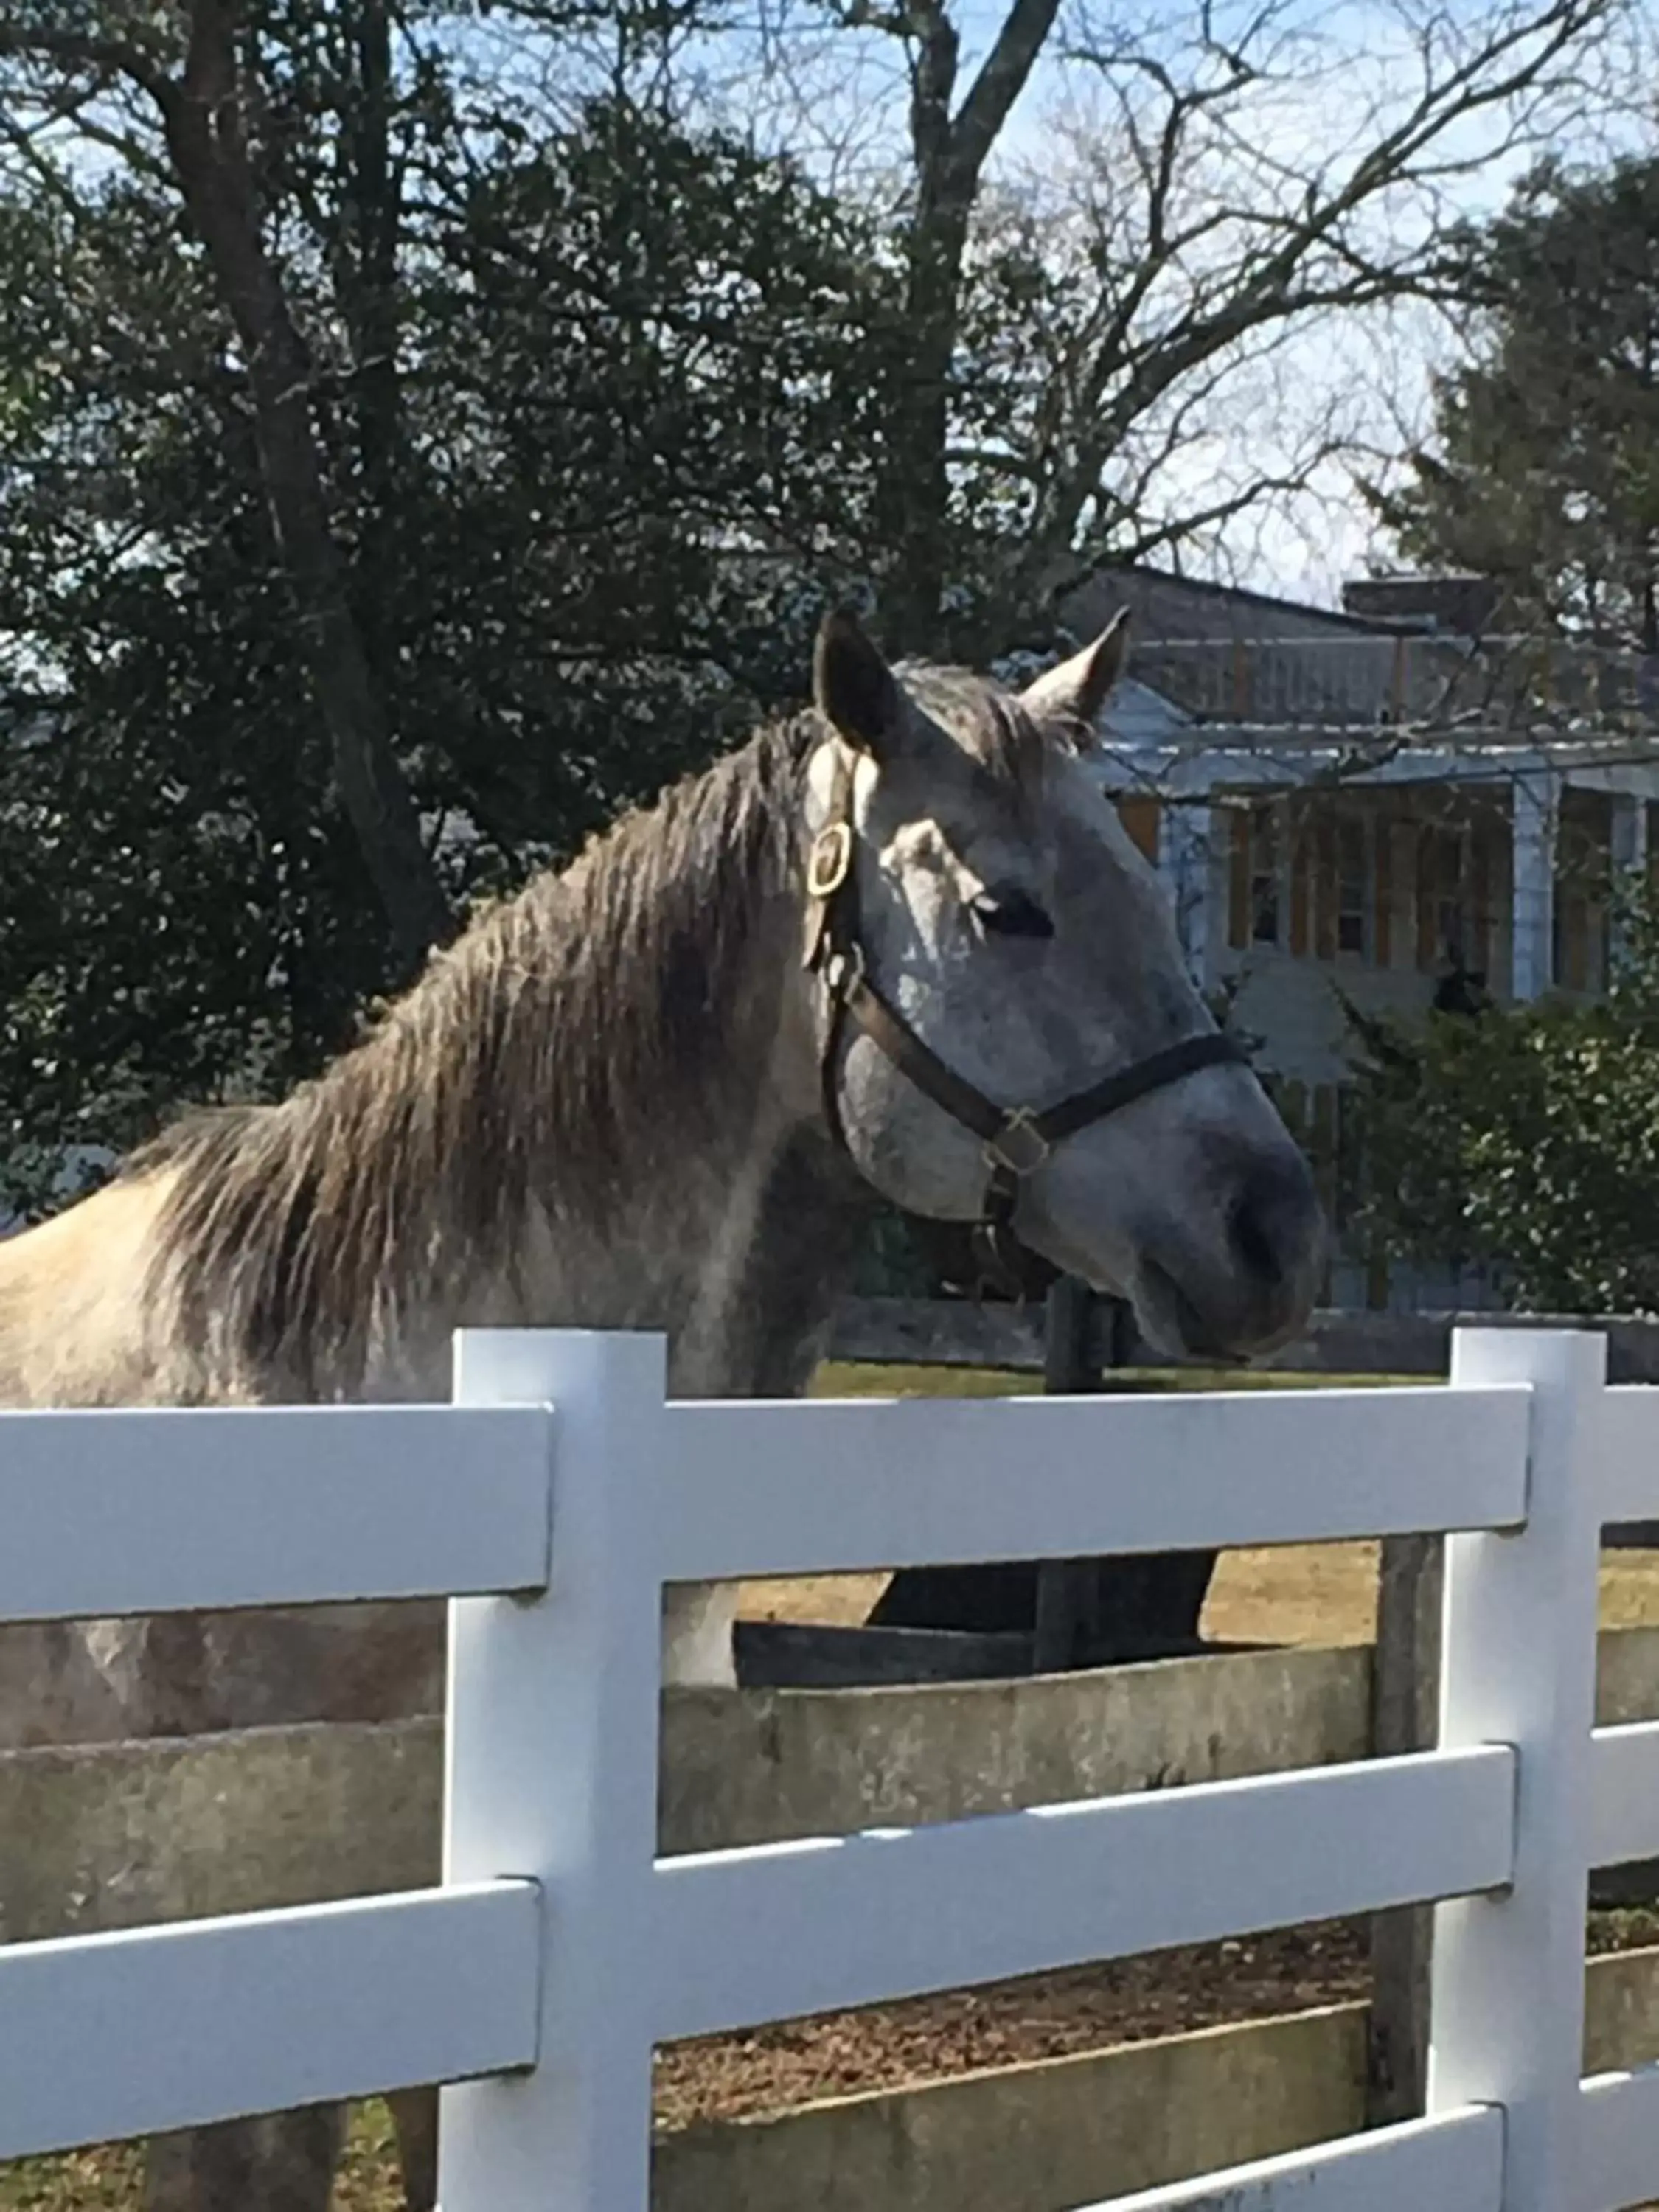 Off site, Other Animals in Colts Neck Inn Hotel